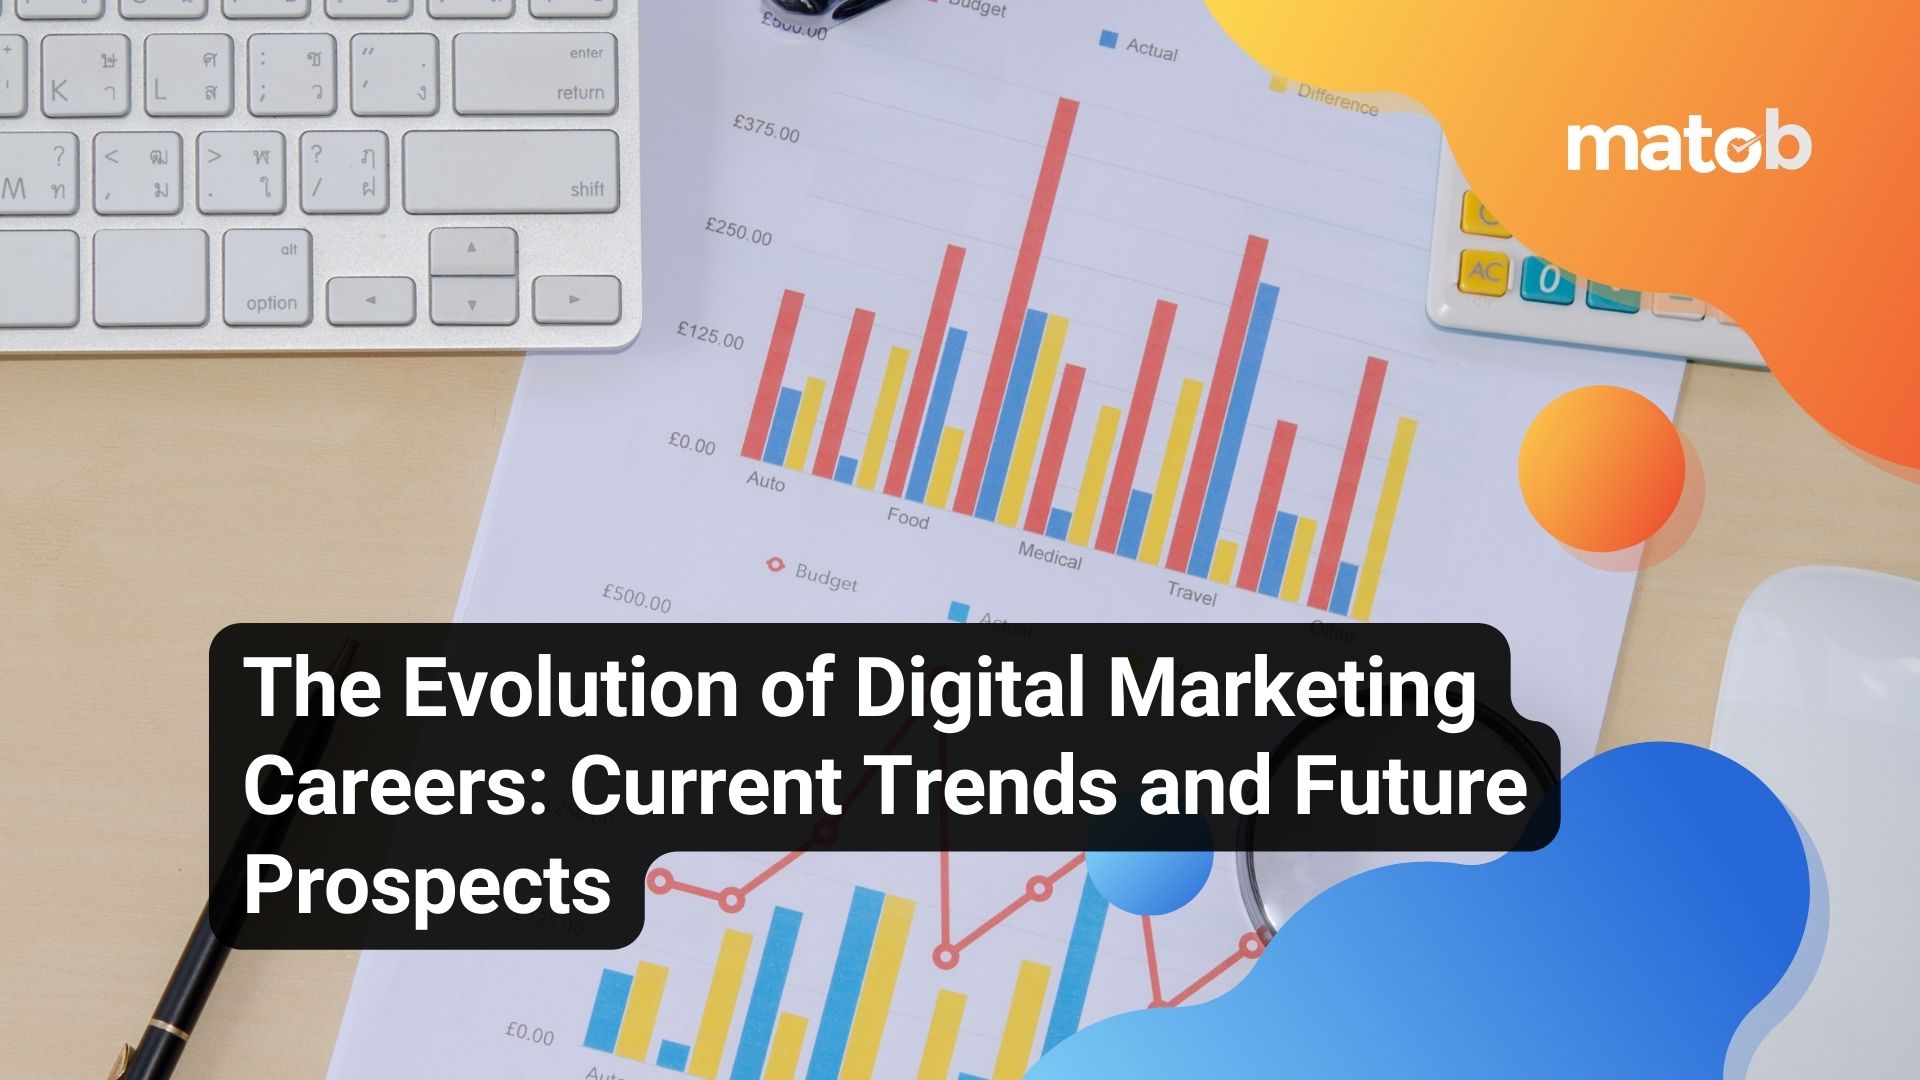 The Evolution of Digital Marketing Careers: Current Trends and Future Prospects